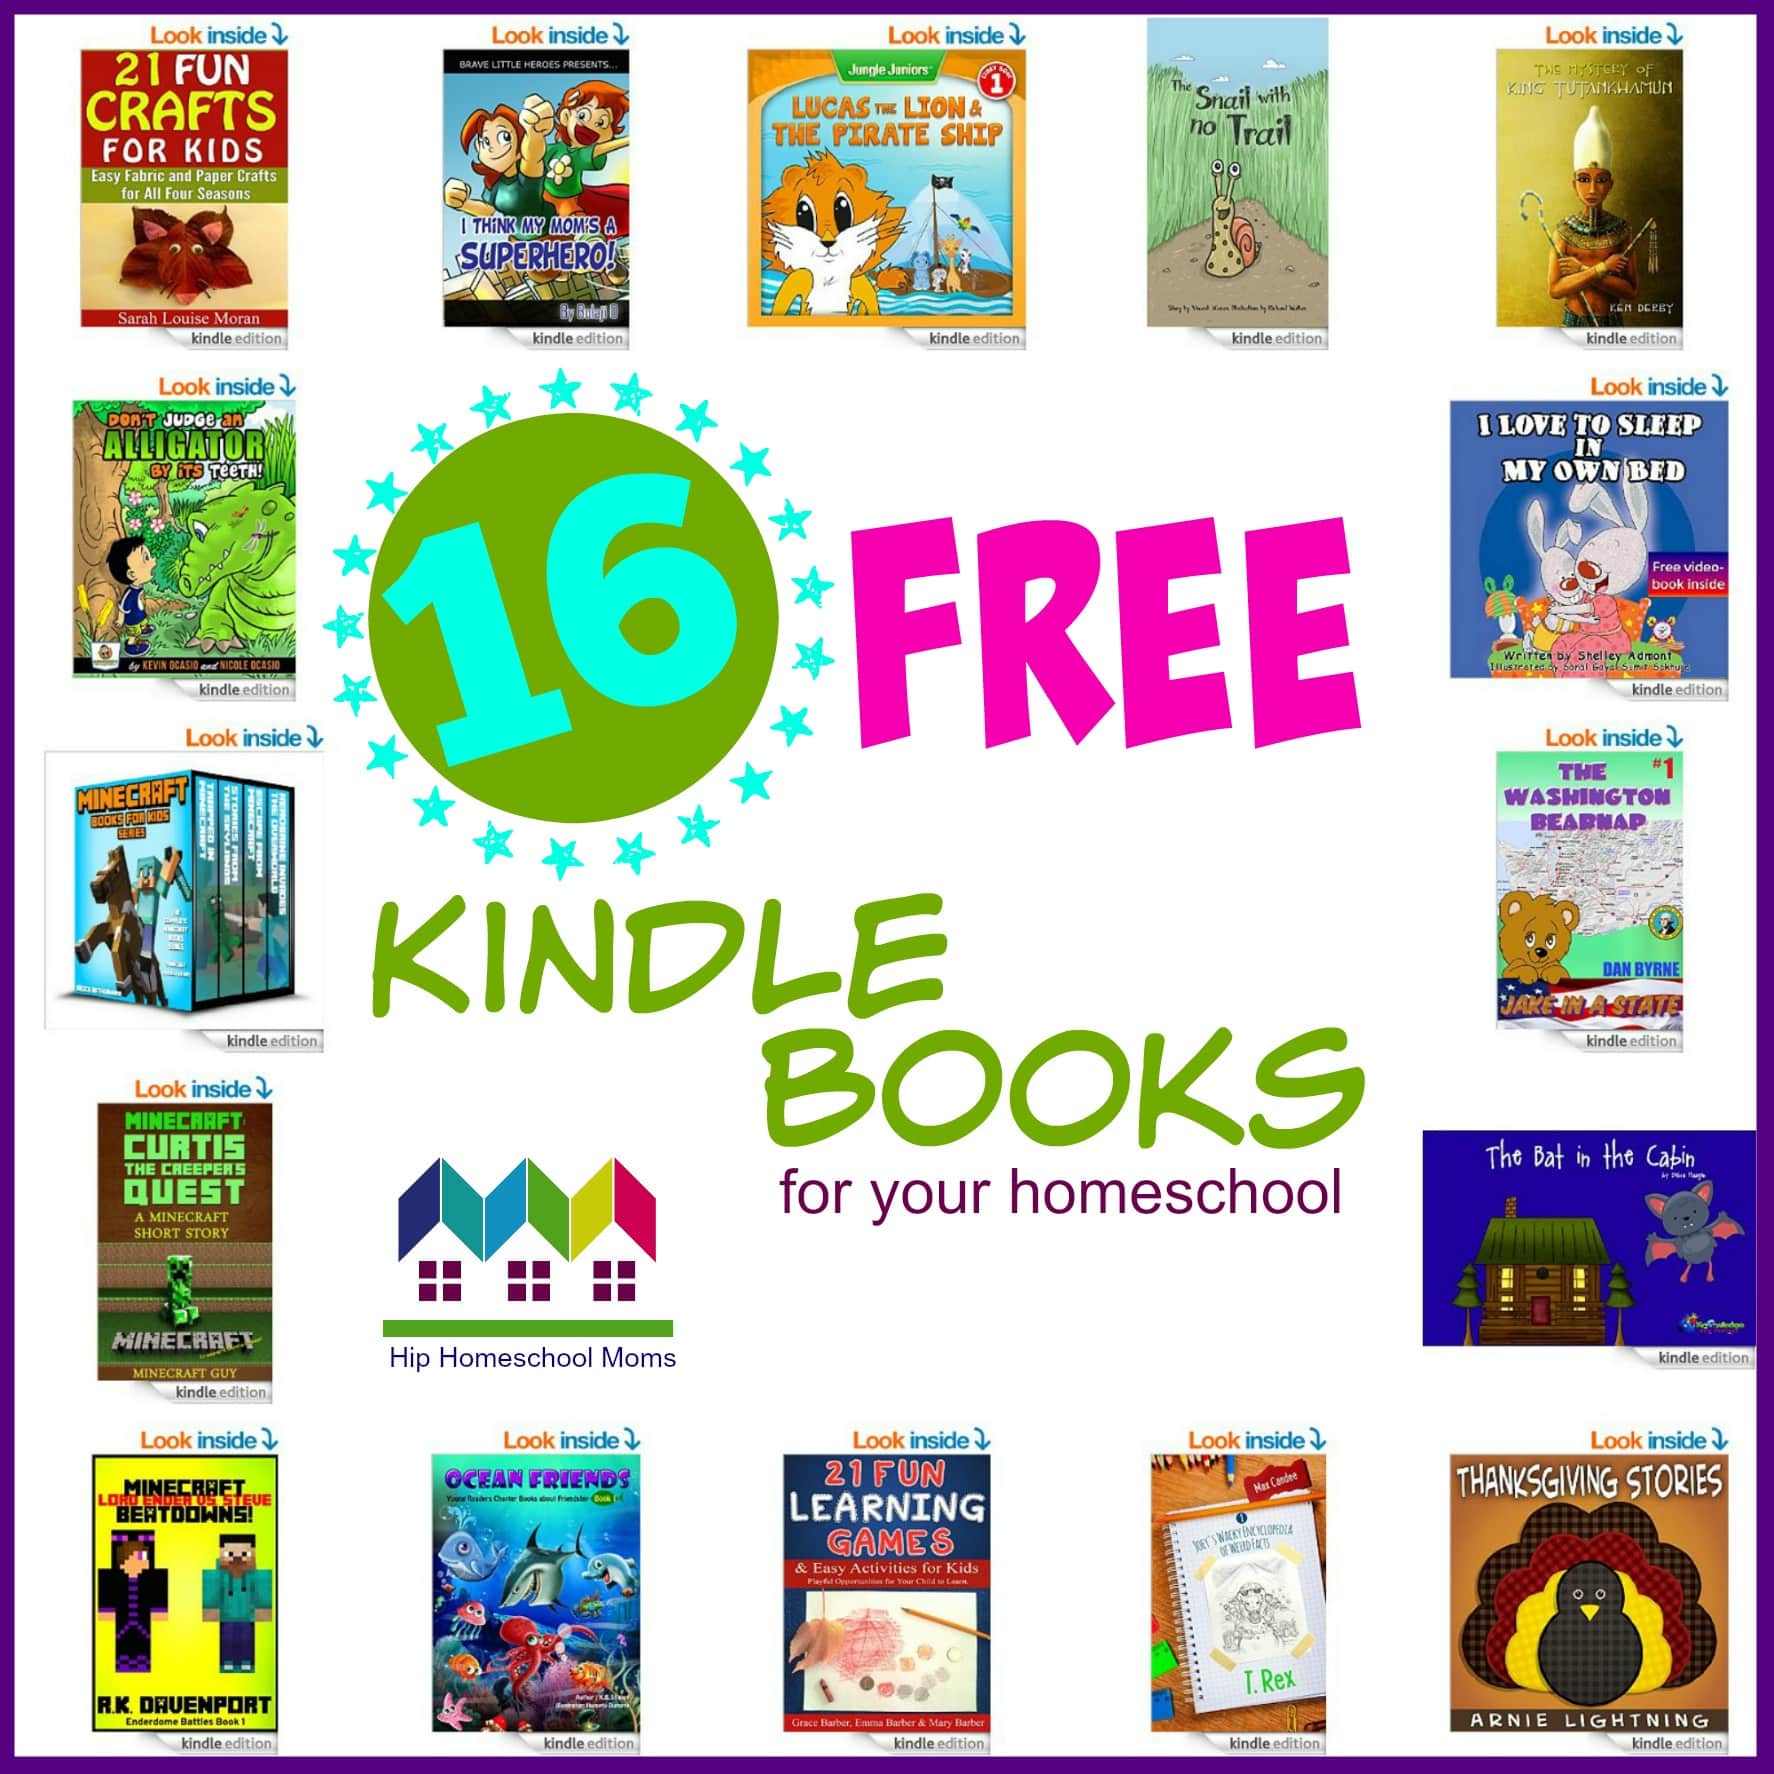 16 Free Kindle Books for your Homeschool